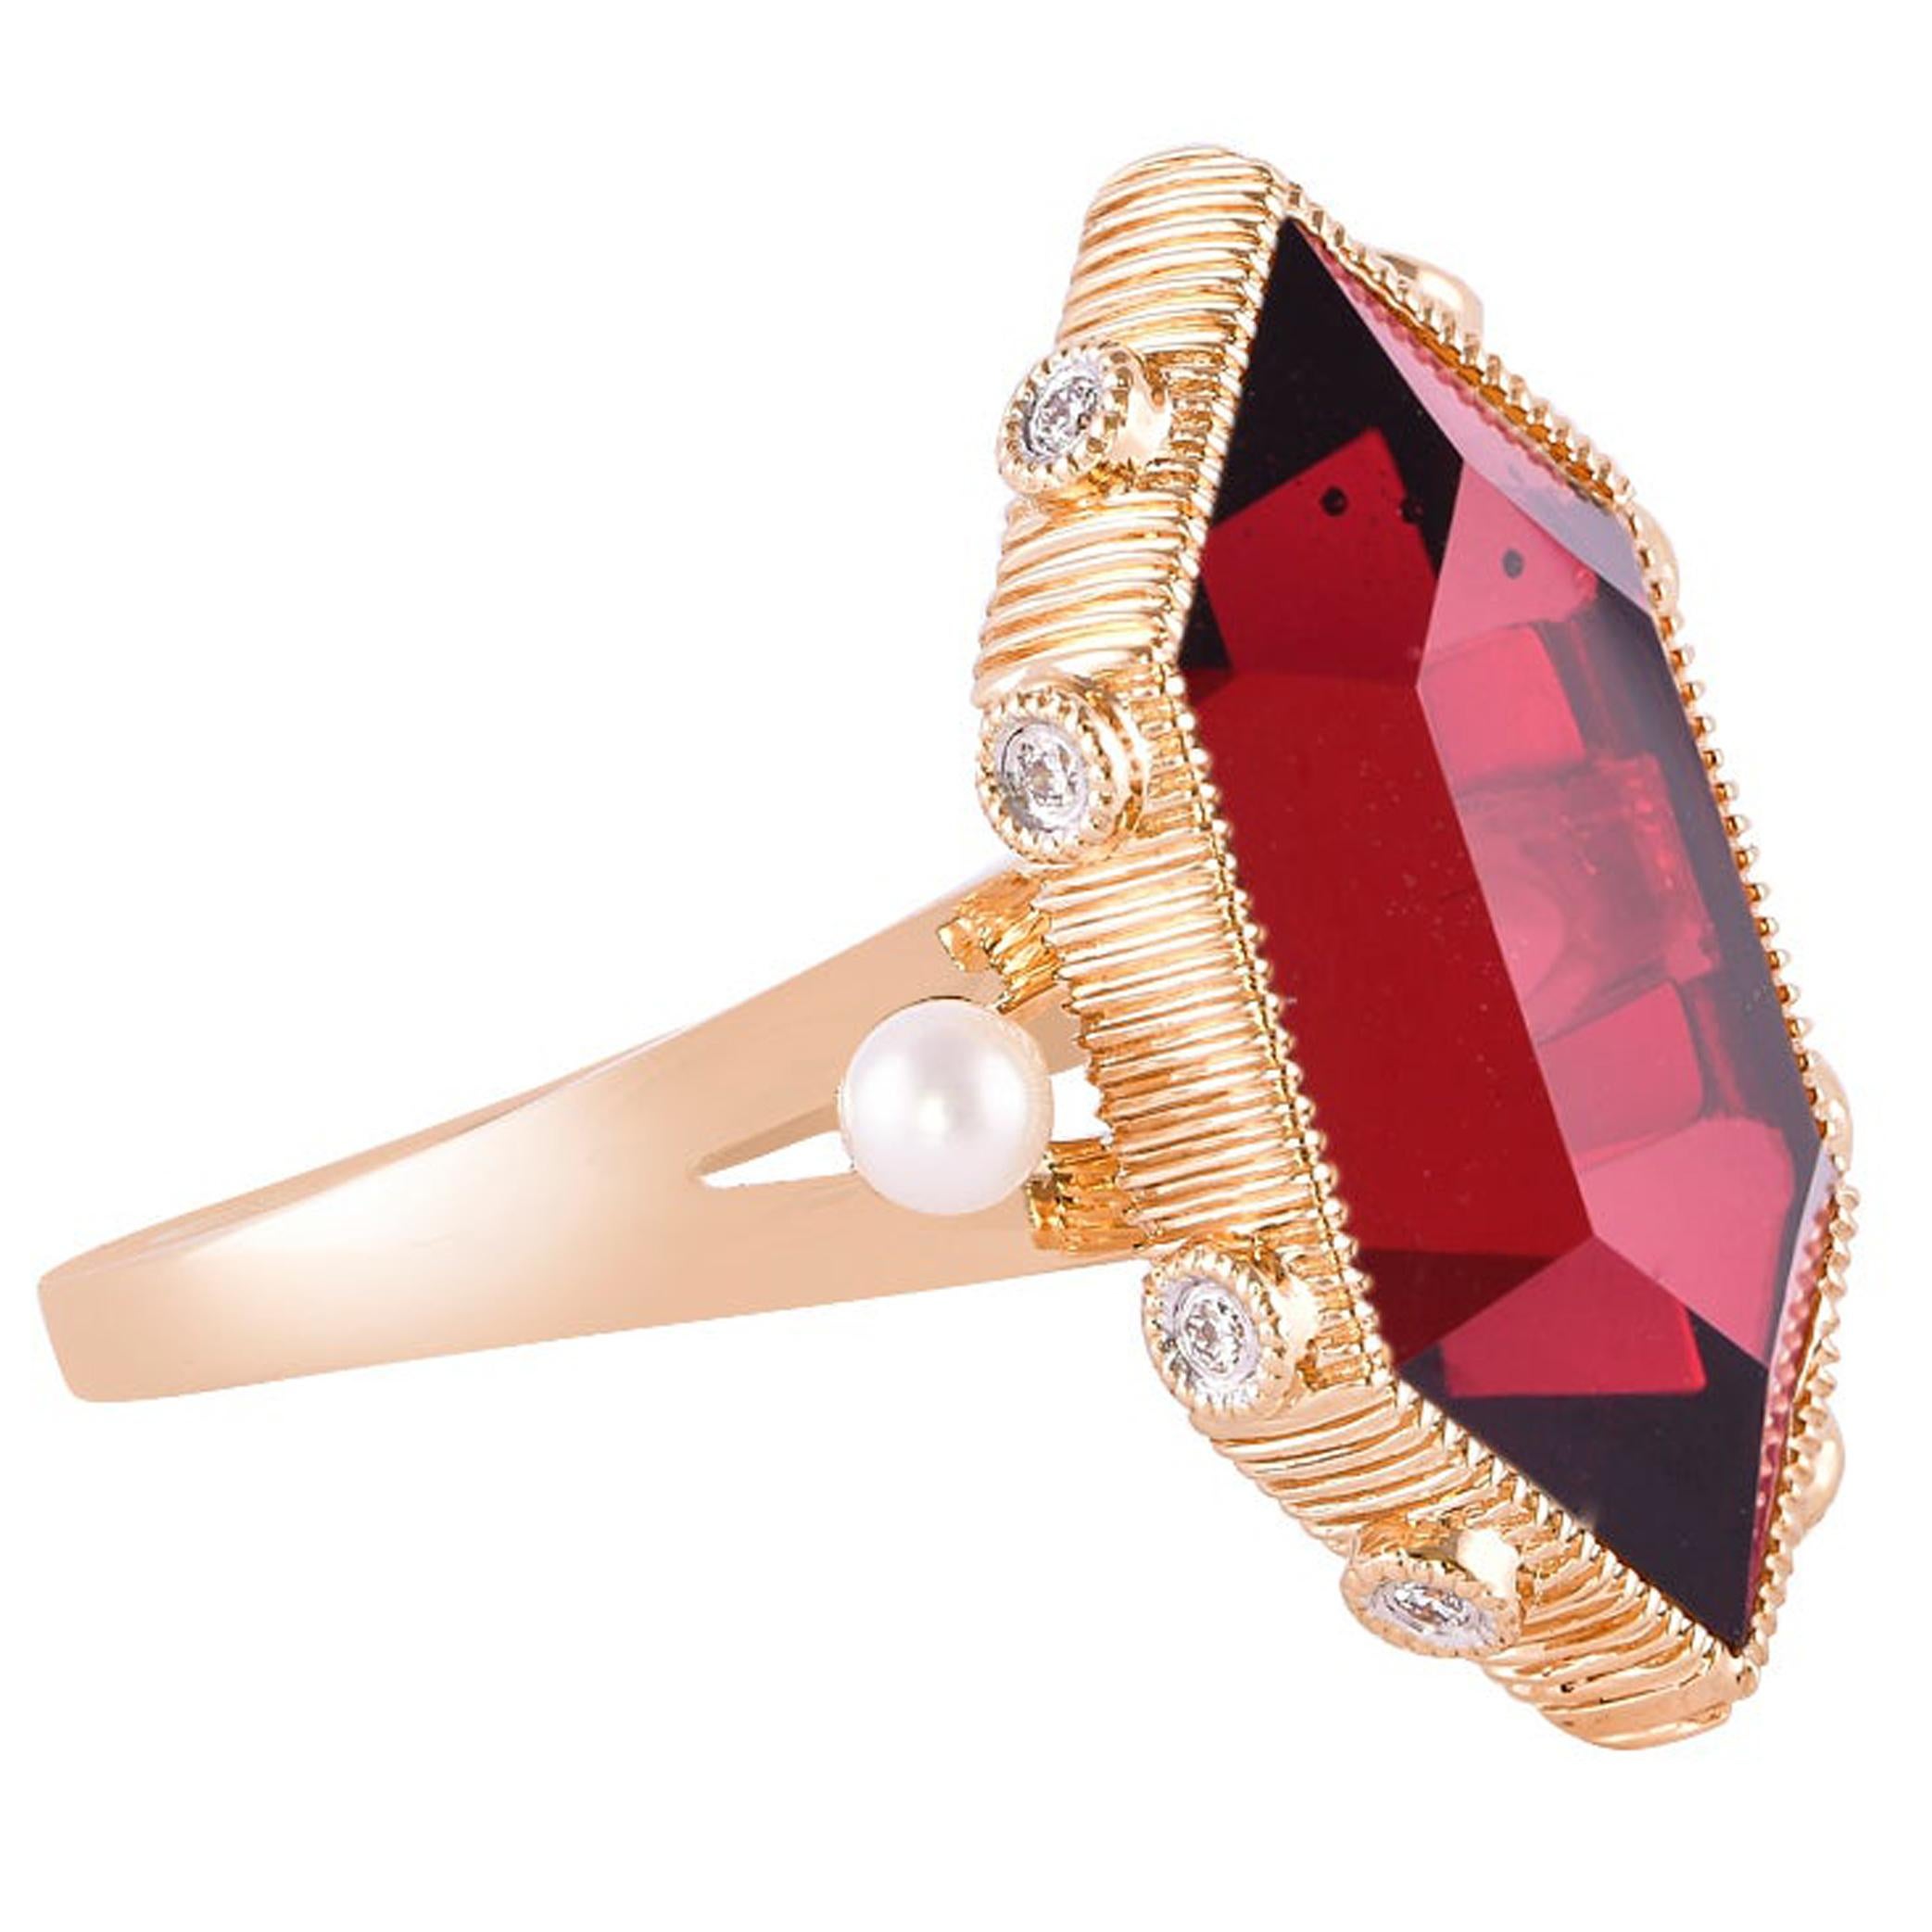 11.85 Carat Red Garnet Ring in 18 Karat Rose Gold with Diamonds and Pearls